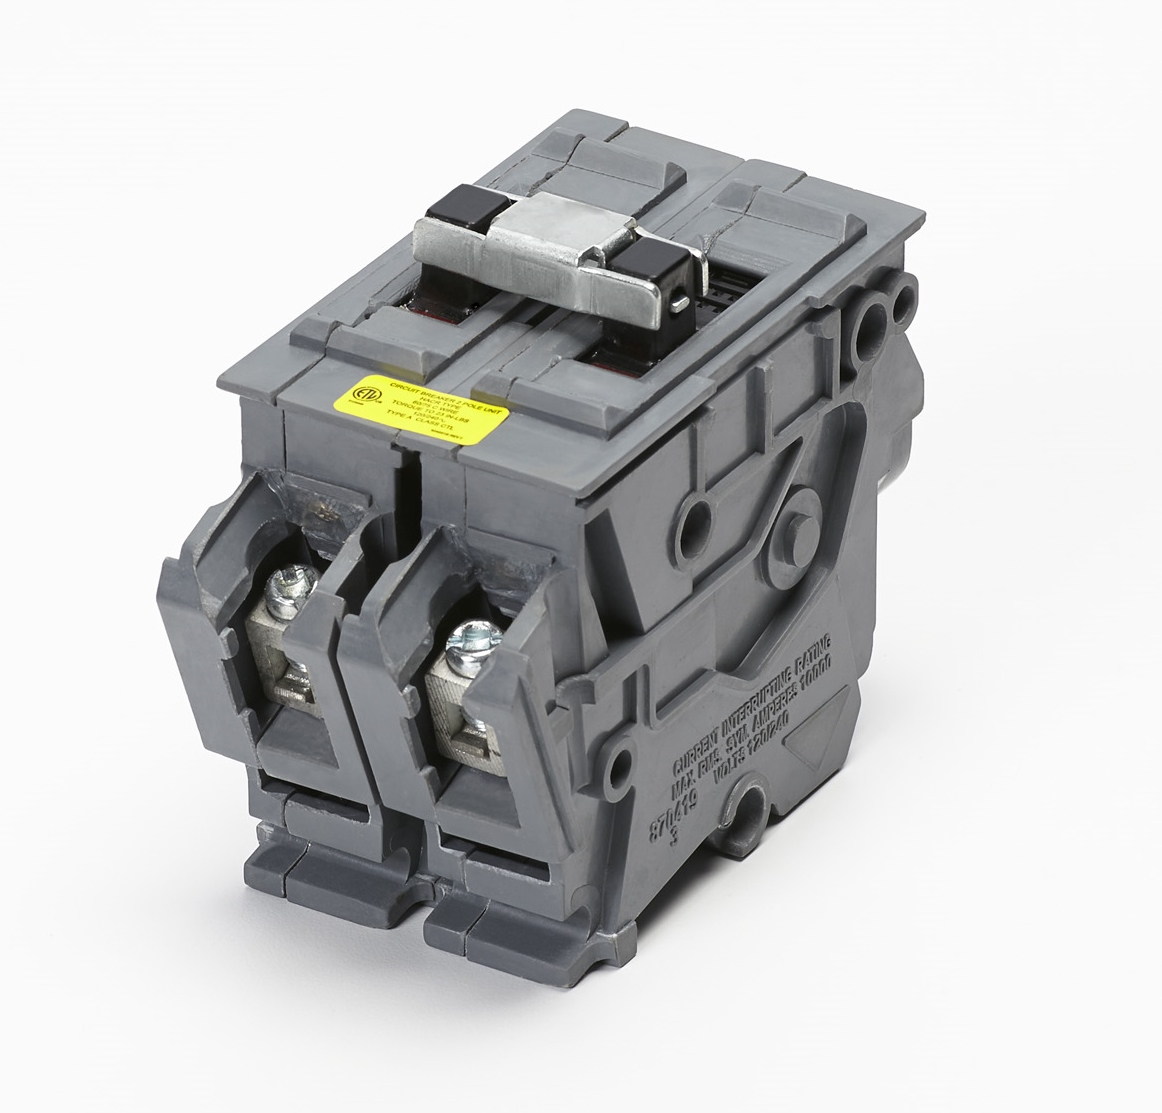 Wadsworth circuit breaker type A by Connecticut Electric. For use in Wadsworth load centers that accept type A (1